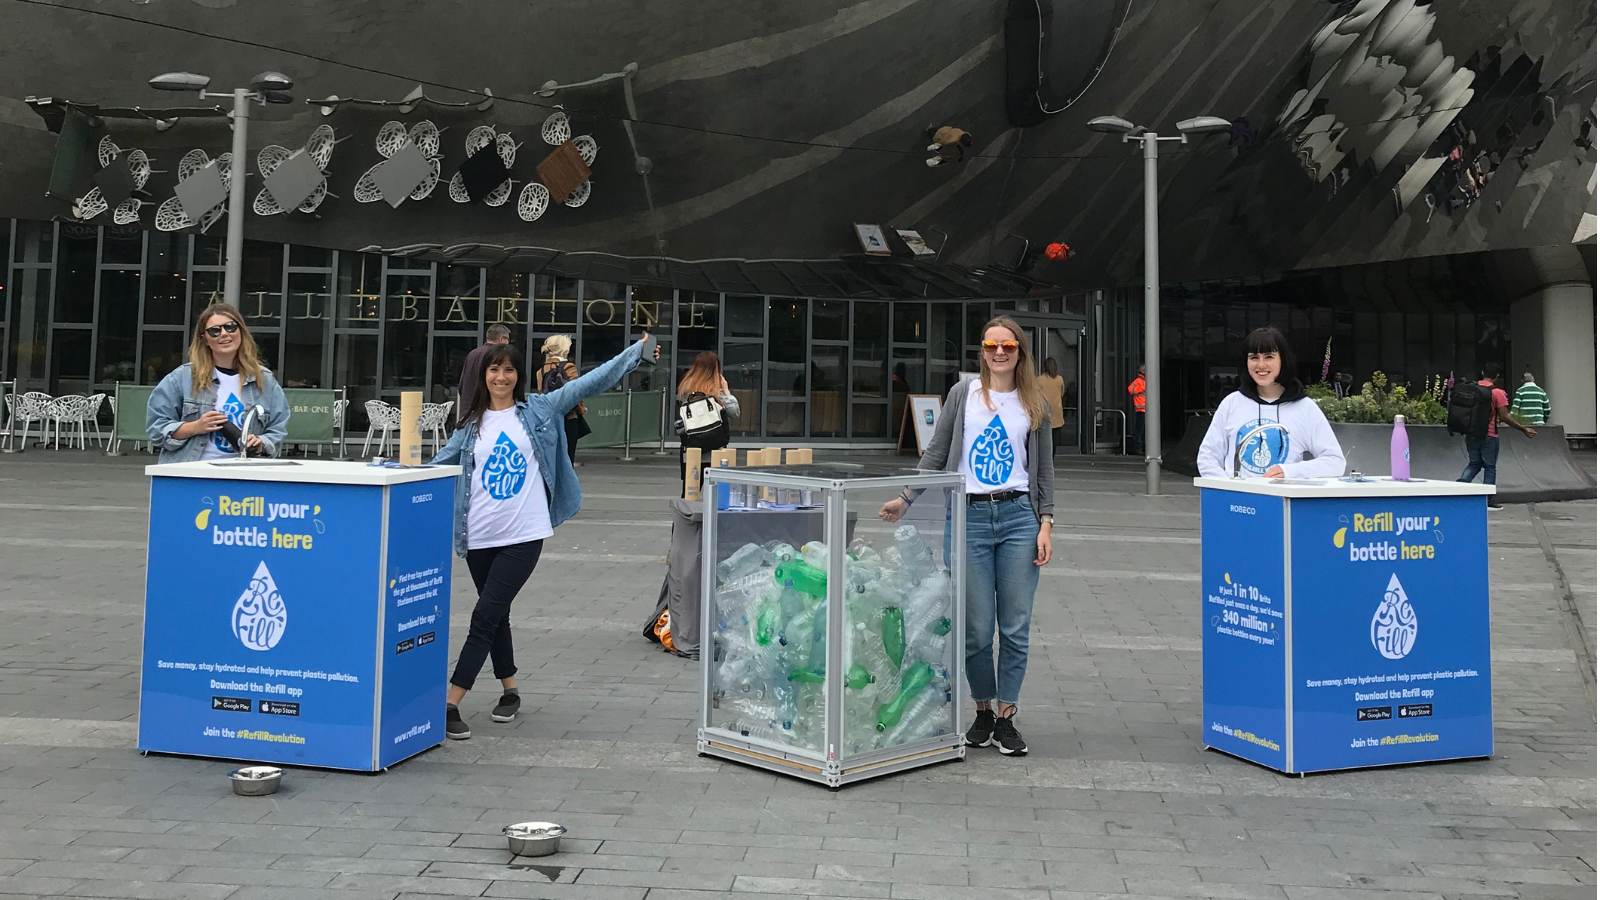 Campaigners ask Birmingham 2022 spectators to save plastic while staying hydrated